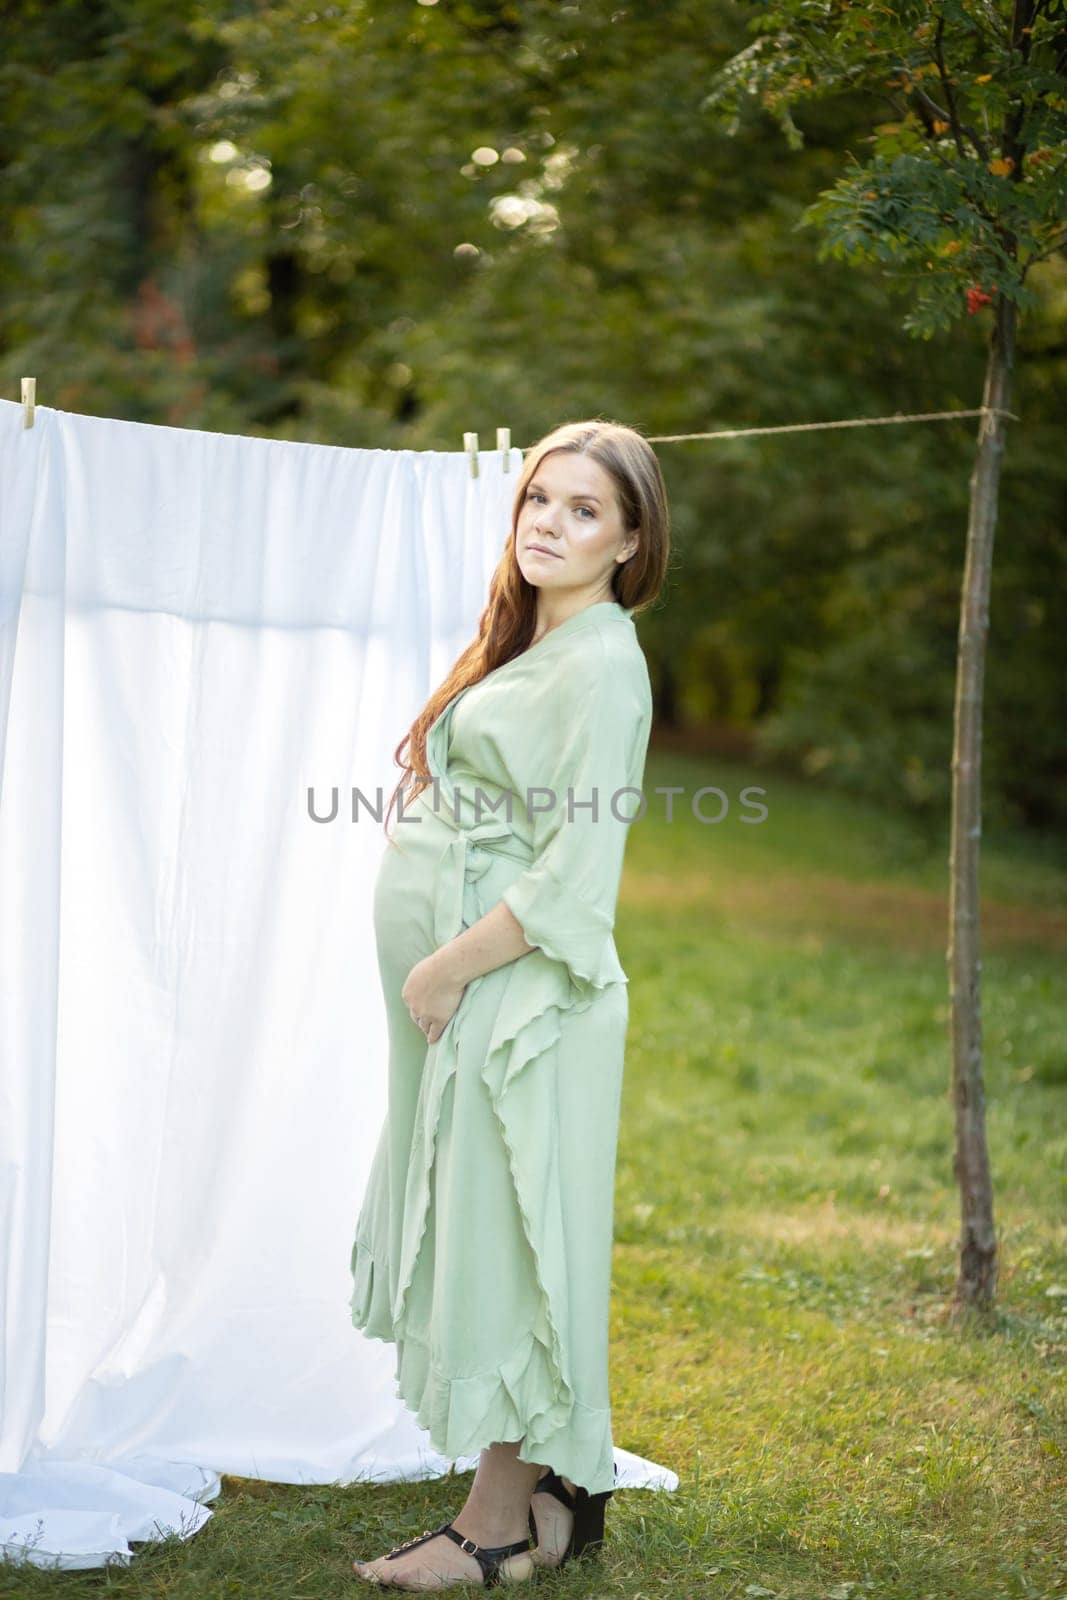 Beautiful pregnant woman with big belly stands near clothesline with bed sheet, young female takes care of sensitive skin's microbiome, drying cloth in fresh air outside, Vertical plane by netatsi